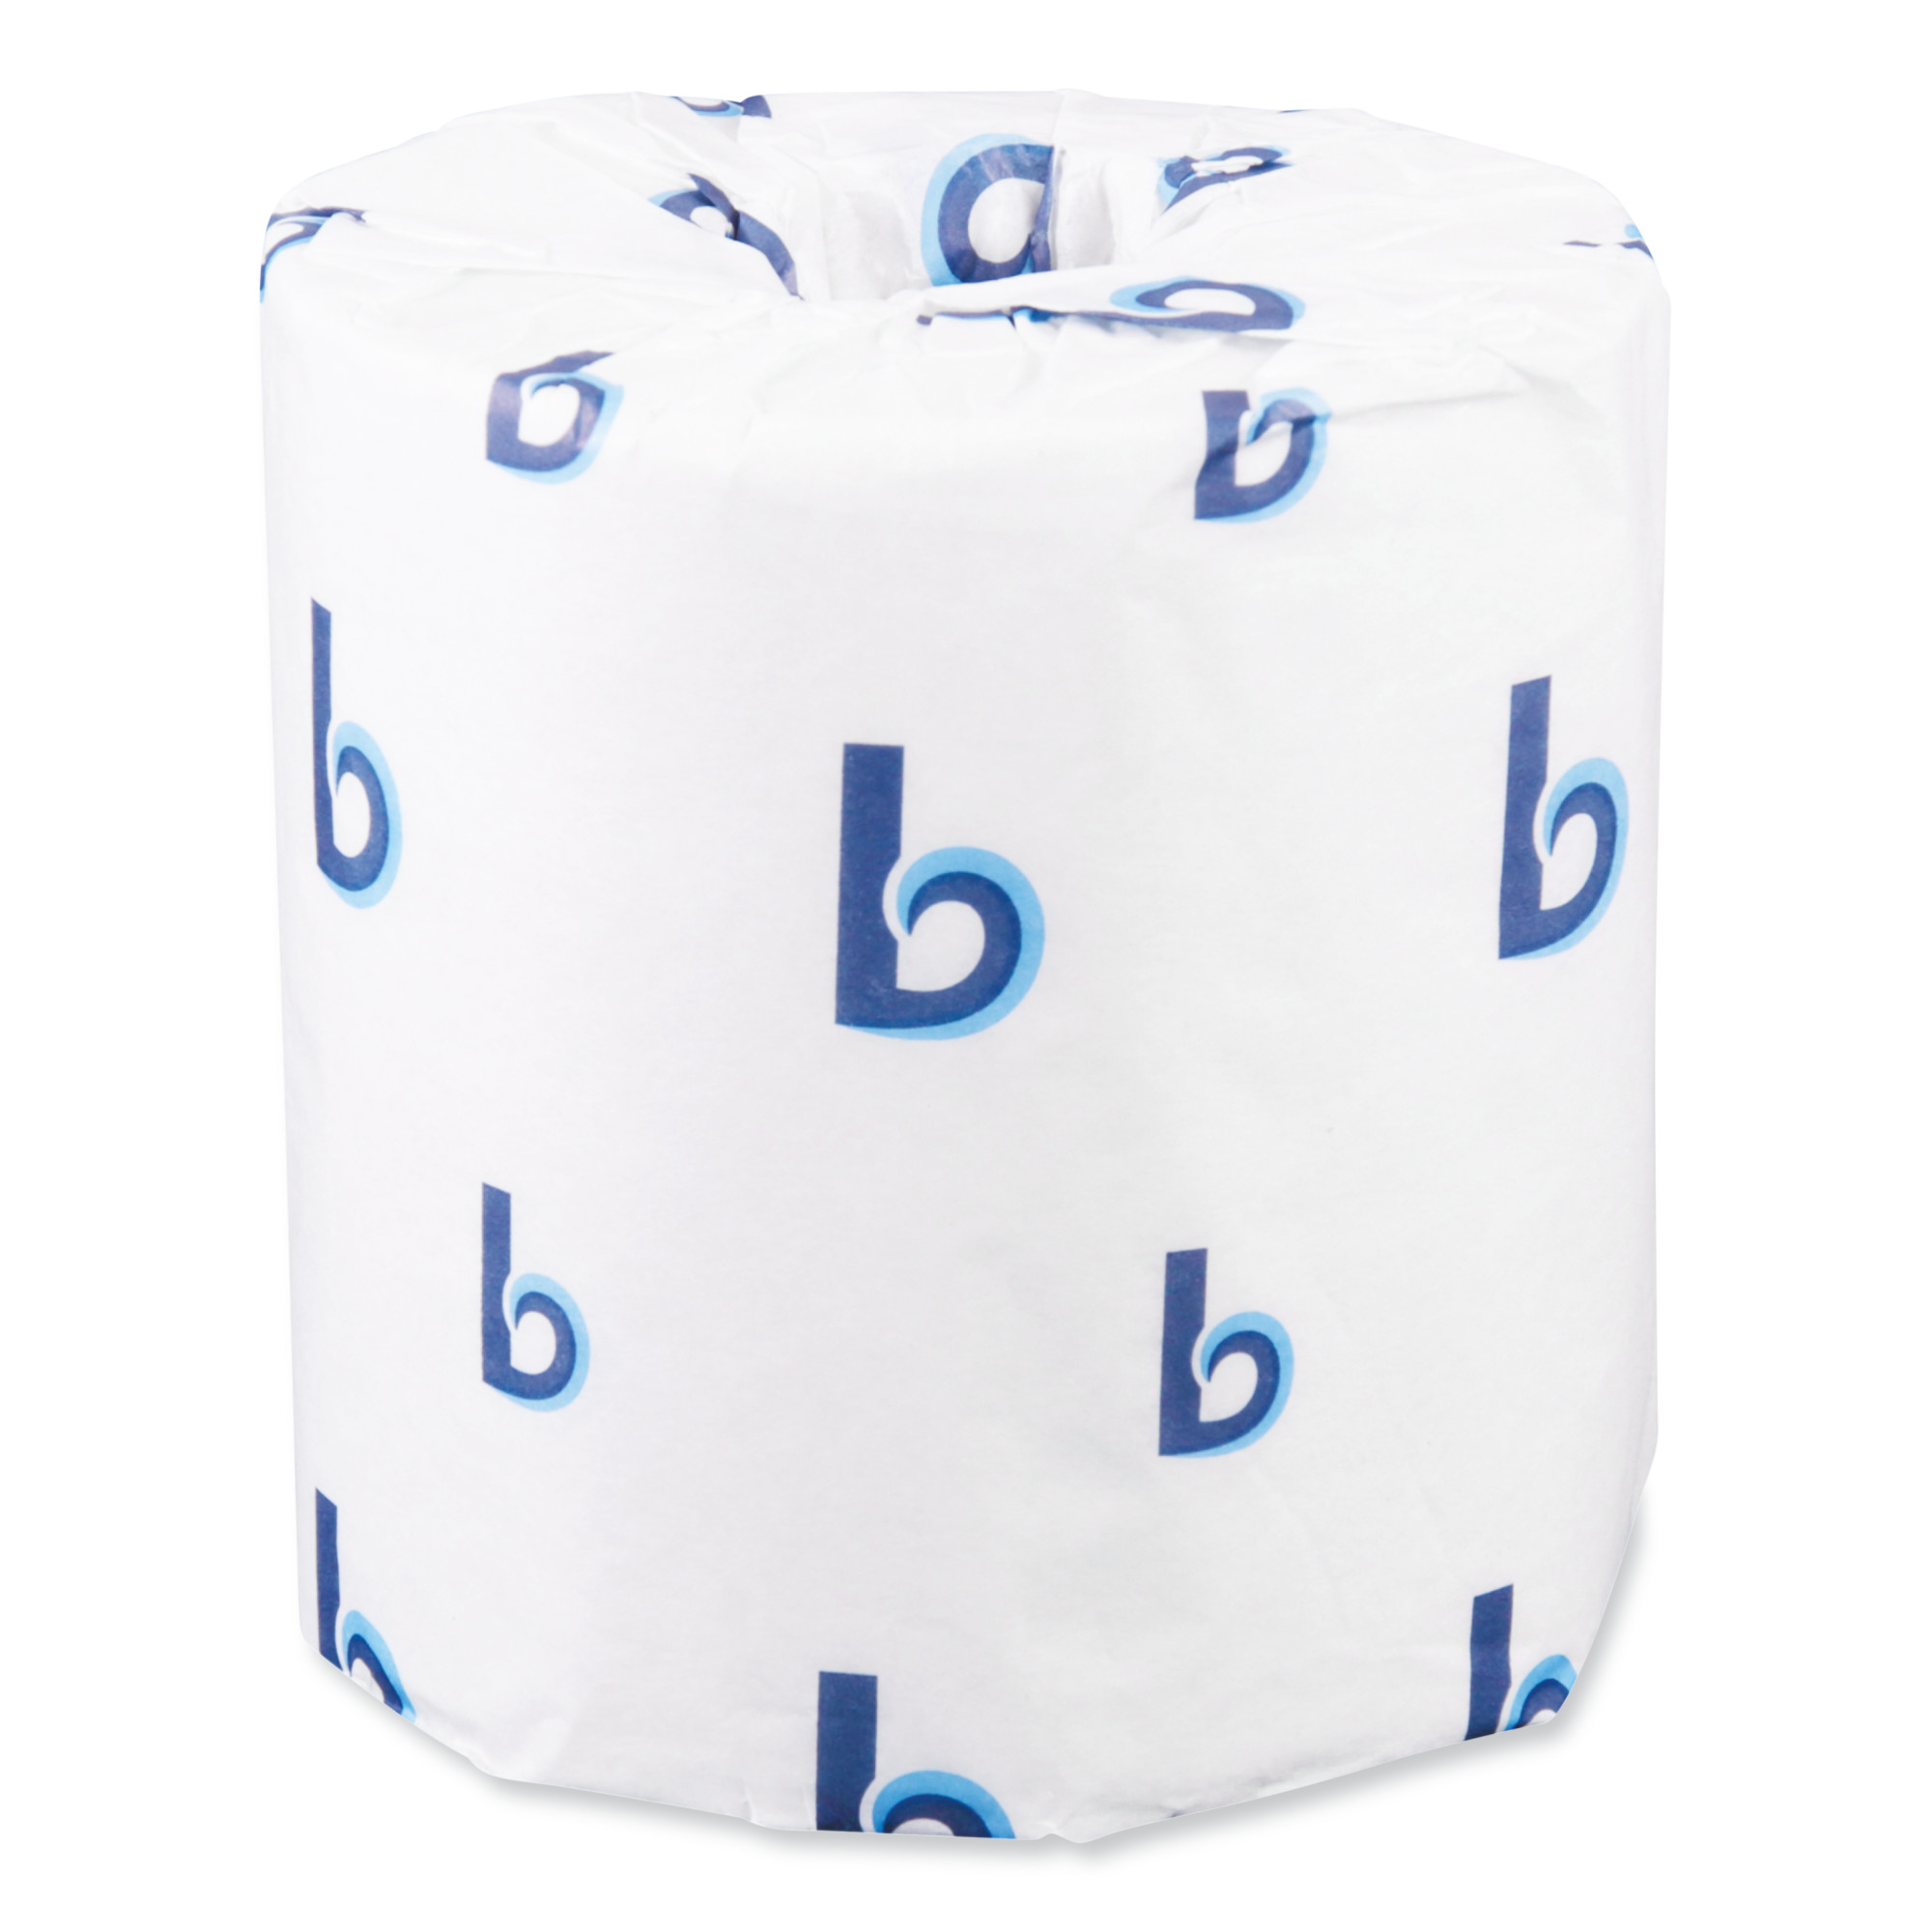 Two-Ply Toilet Tissue, White, 4 1/2 x 3 Sheet, 500 Sheets/Roll, 96 Rolls/Case